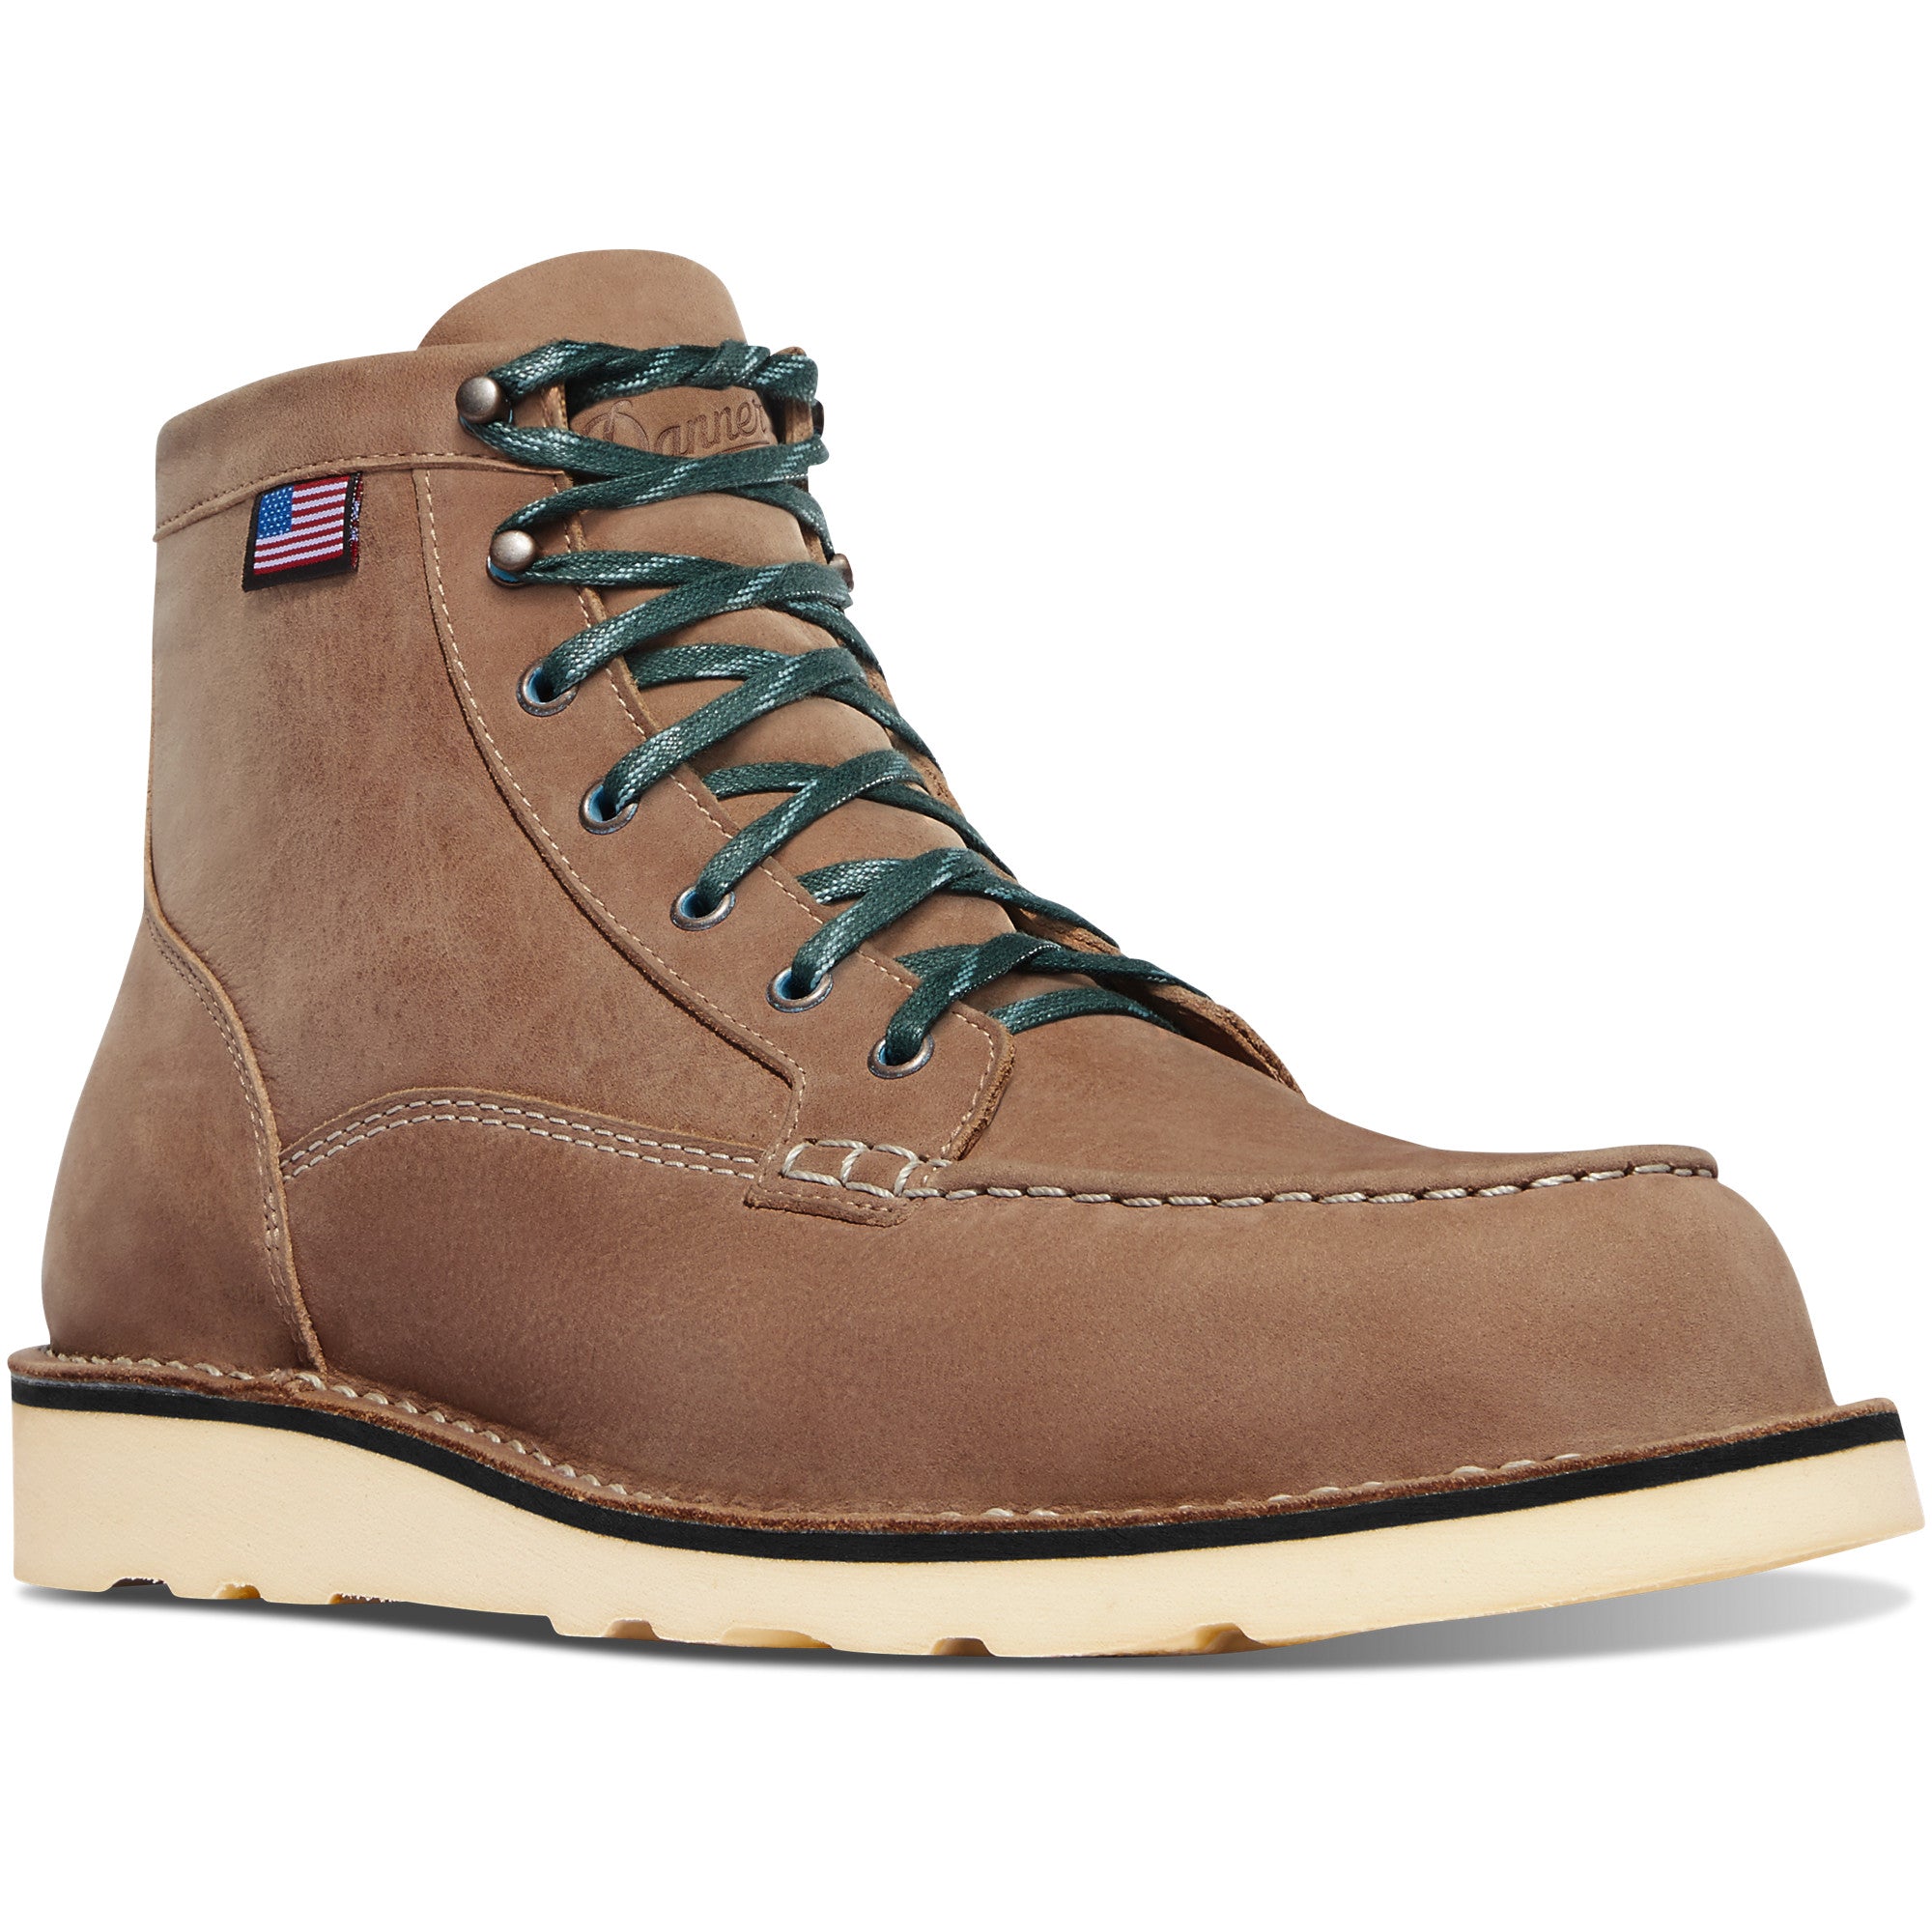 Danner Men's Bull Run Lux Lifestyle Boot in Burro Brown from the side